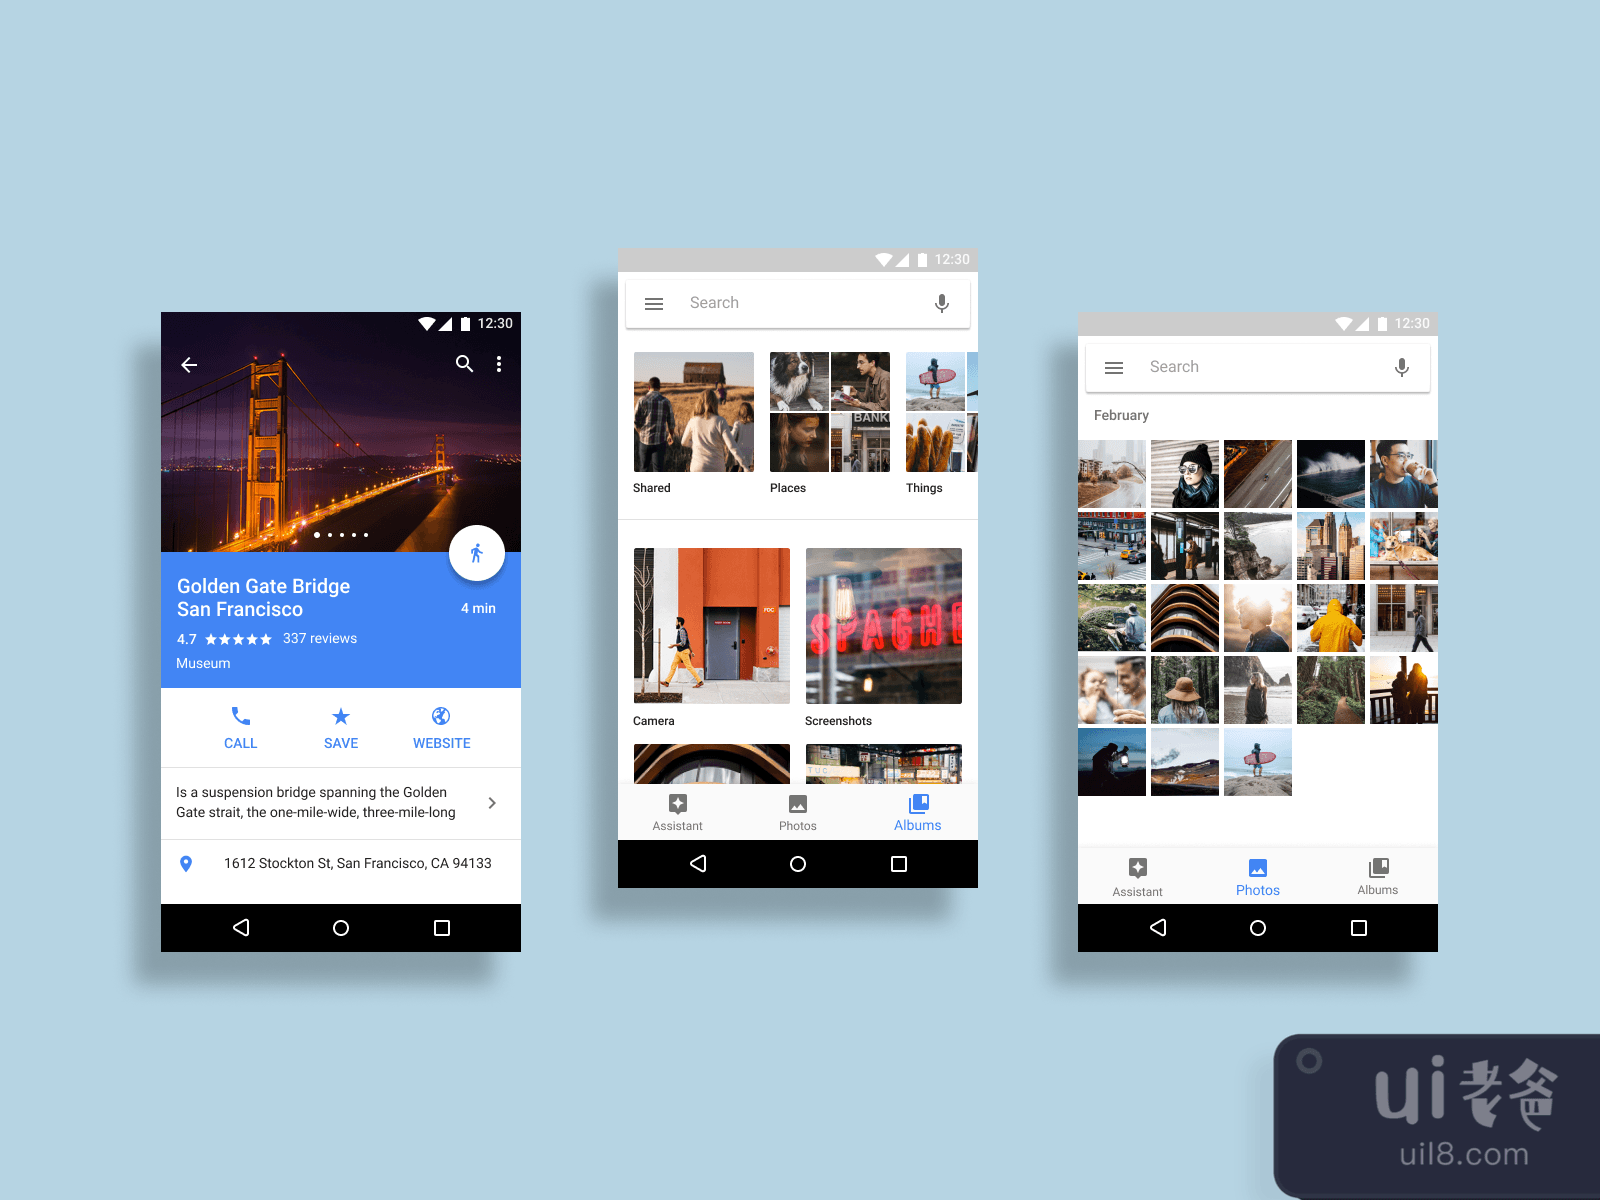 Android 7 Nougat GUI for Figma and Adobe XD No 3